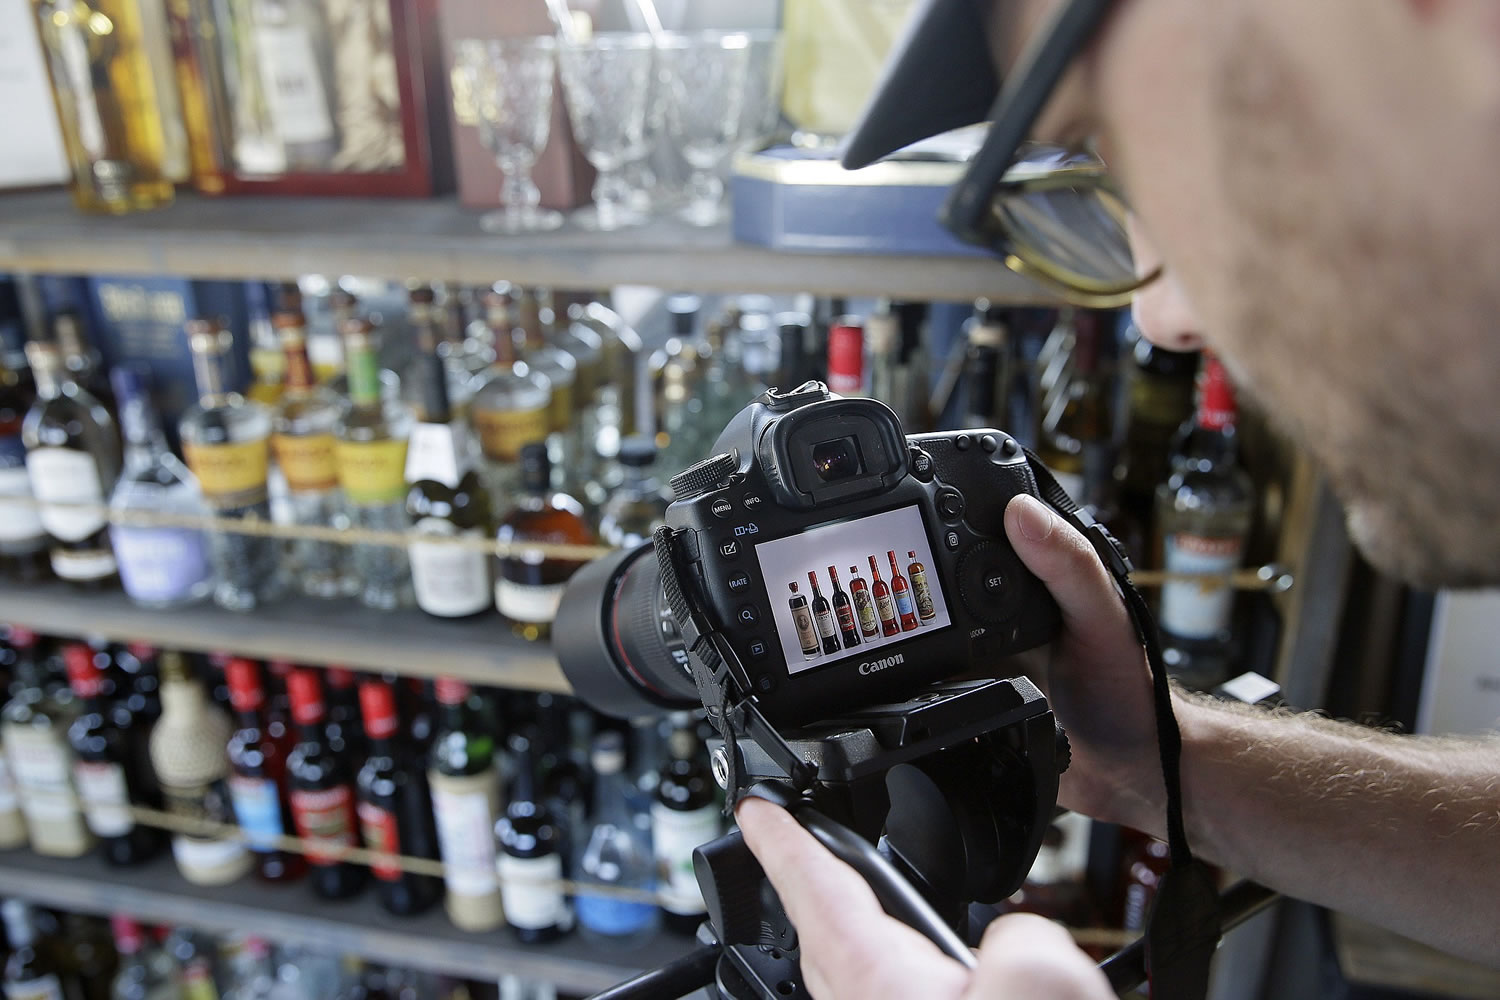 Alan Kropf, director of education, shoots an educational video for brand promotion July 30 at the Anchor Distilling Company in San Francisco.